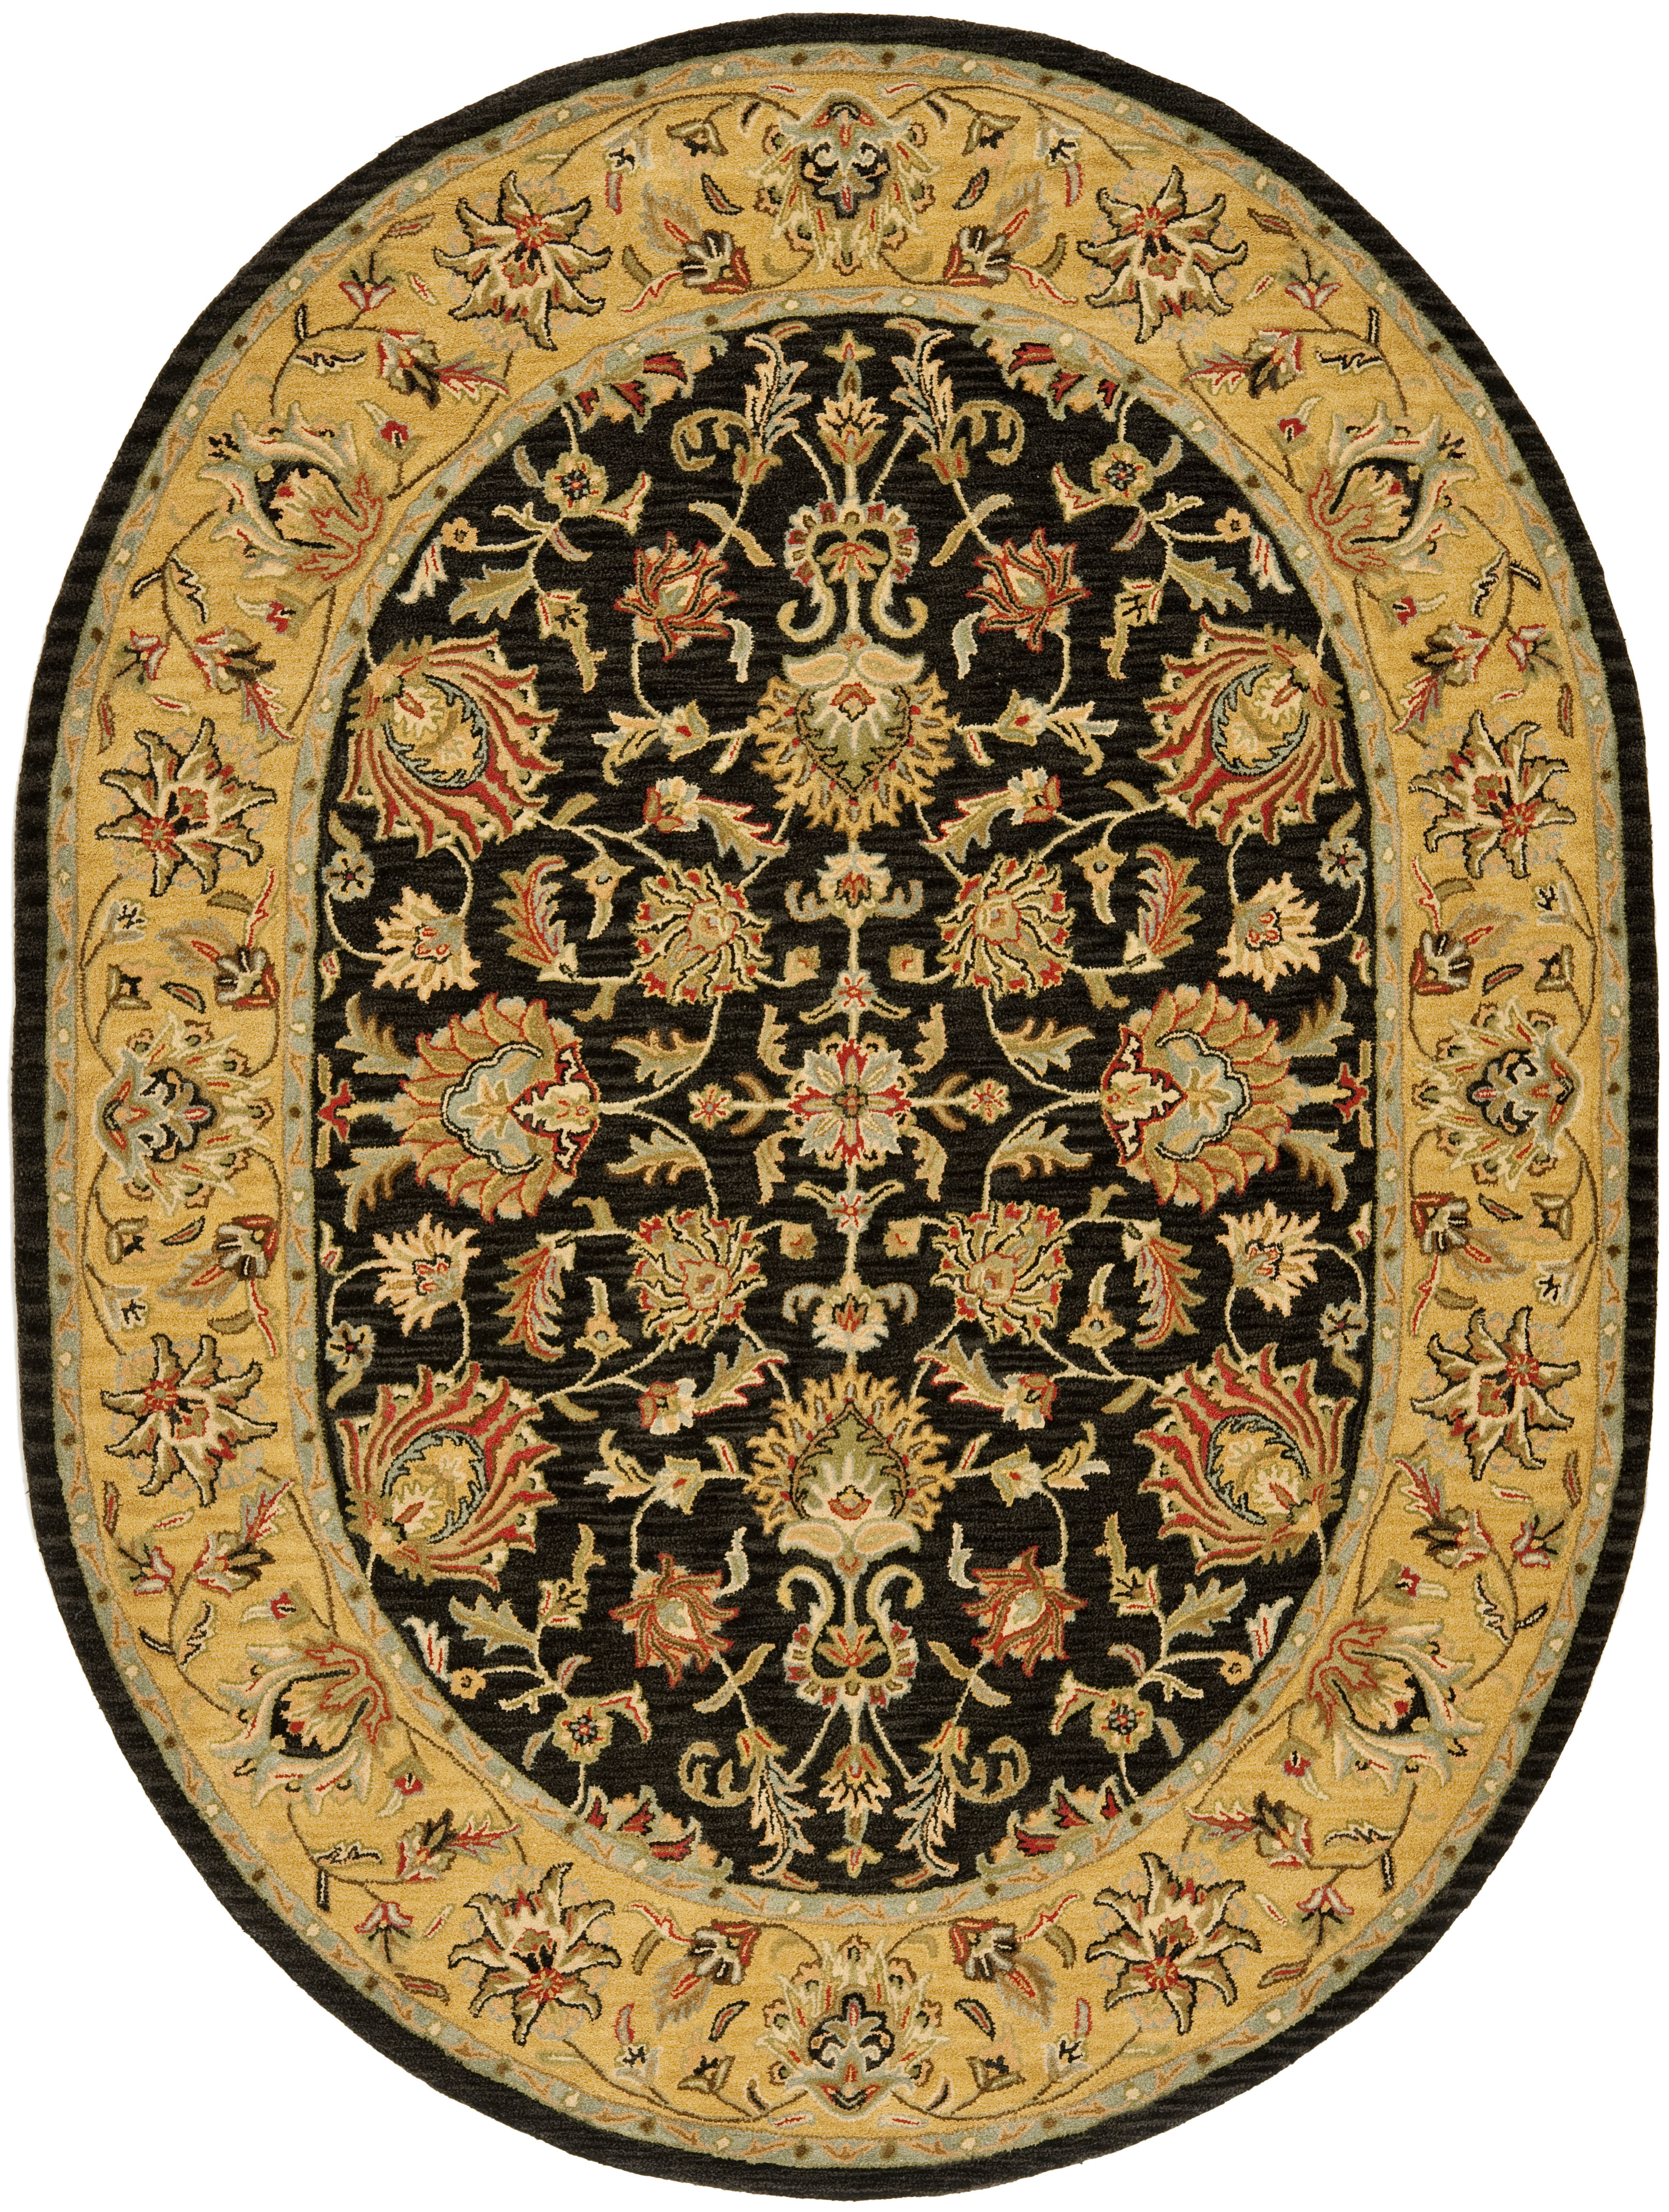 SAFAVIEH Heritage Regis Traditional Wool Area Rug, Charcoal/Gold, 4'6" x 6'6" Oval - image 1 of 4